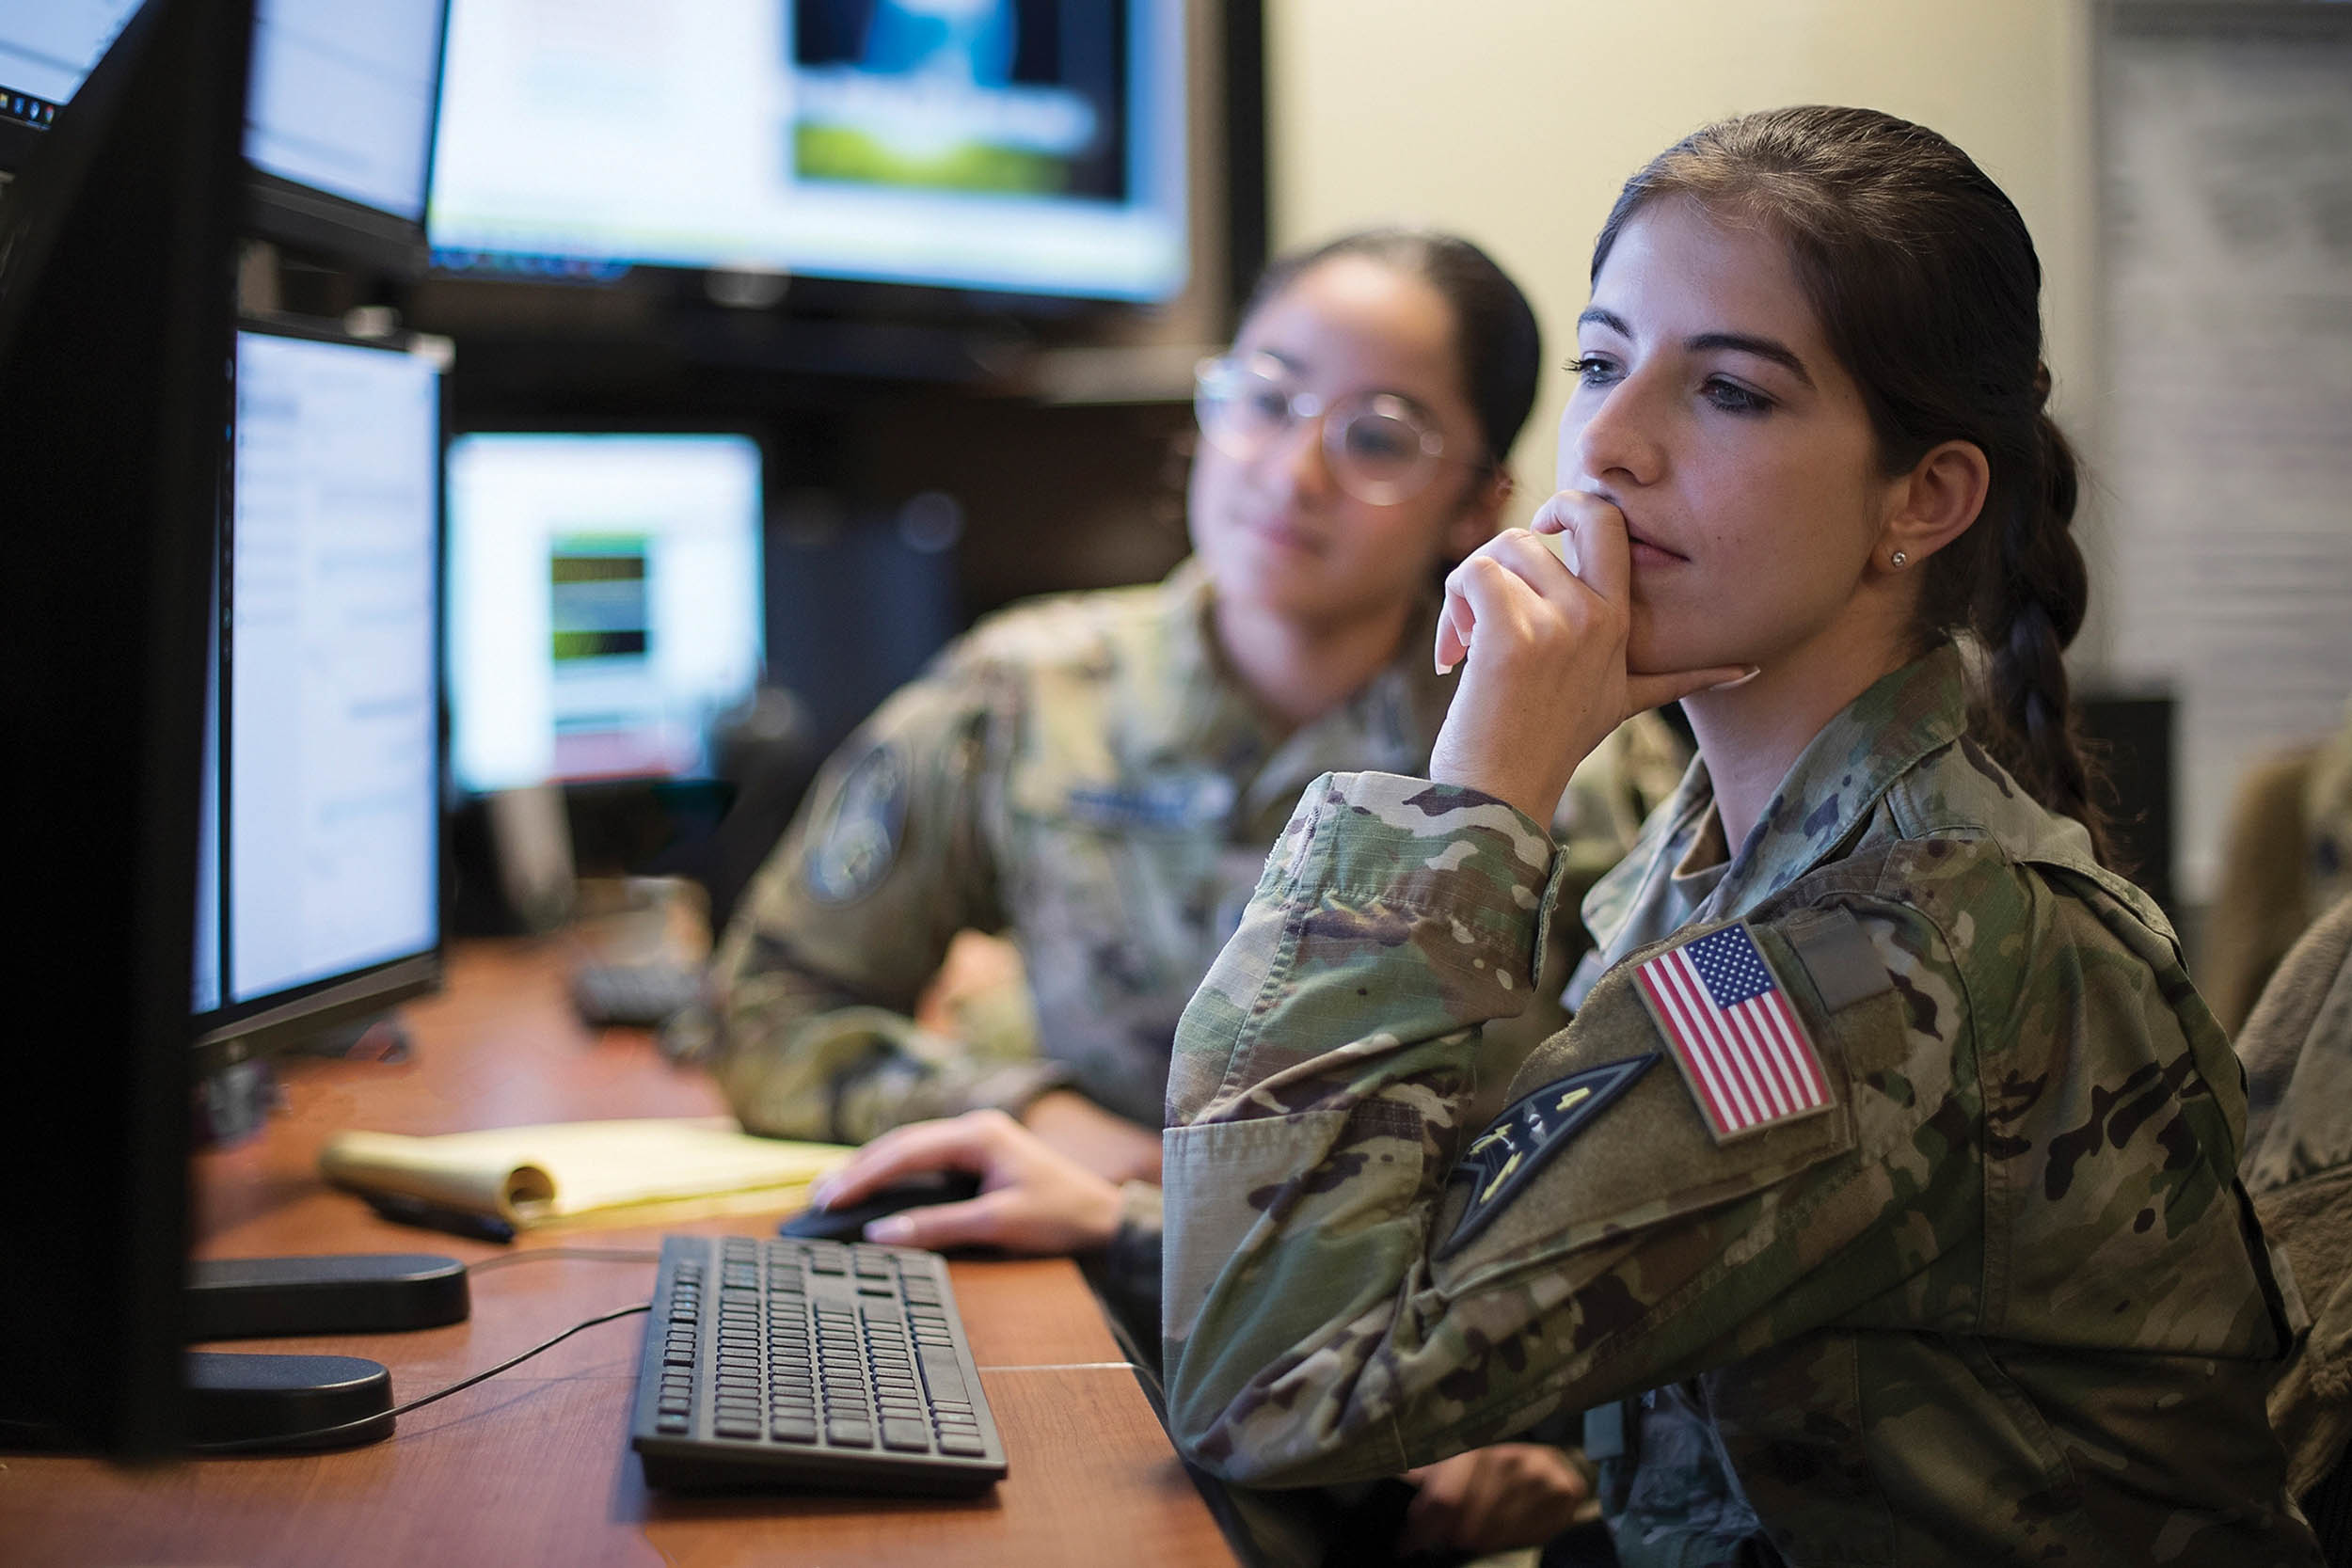 U.S. Space Force 1st Lieutenant Laura Drapinski, 2nd Space Warning Squadron, front, and Specialist 4 Ariana Gonzalez, 11th Space Warning Squadron, use Space-Based Infrared System Simulator to monitor missile indications during simulated combat operations in U.S. European Command during Space Flag 23-1, at Schriever Space Force Base, Colorado, December 13, 2022 (U.S. Space Force/Judi Tomich)